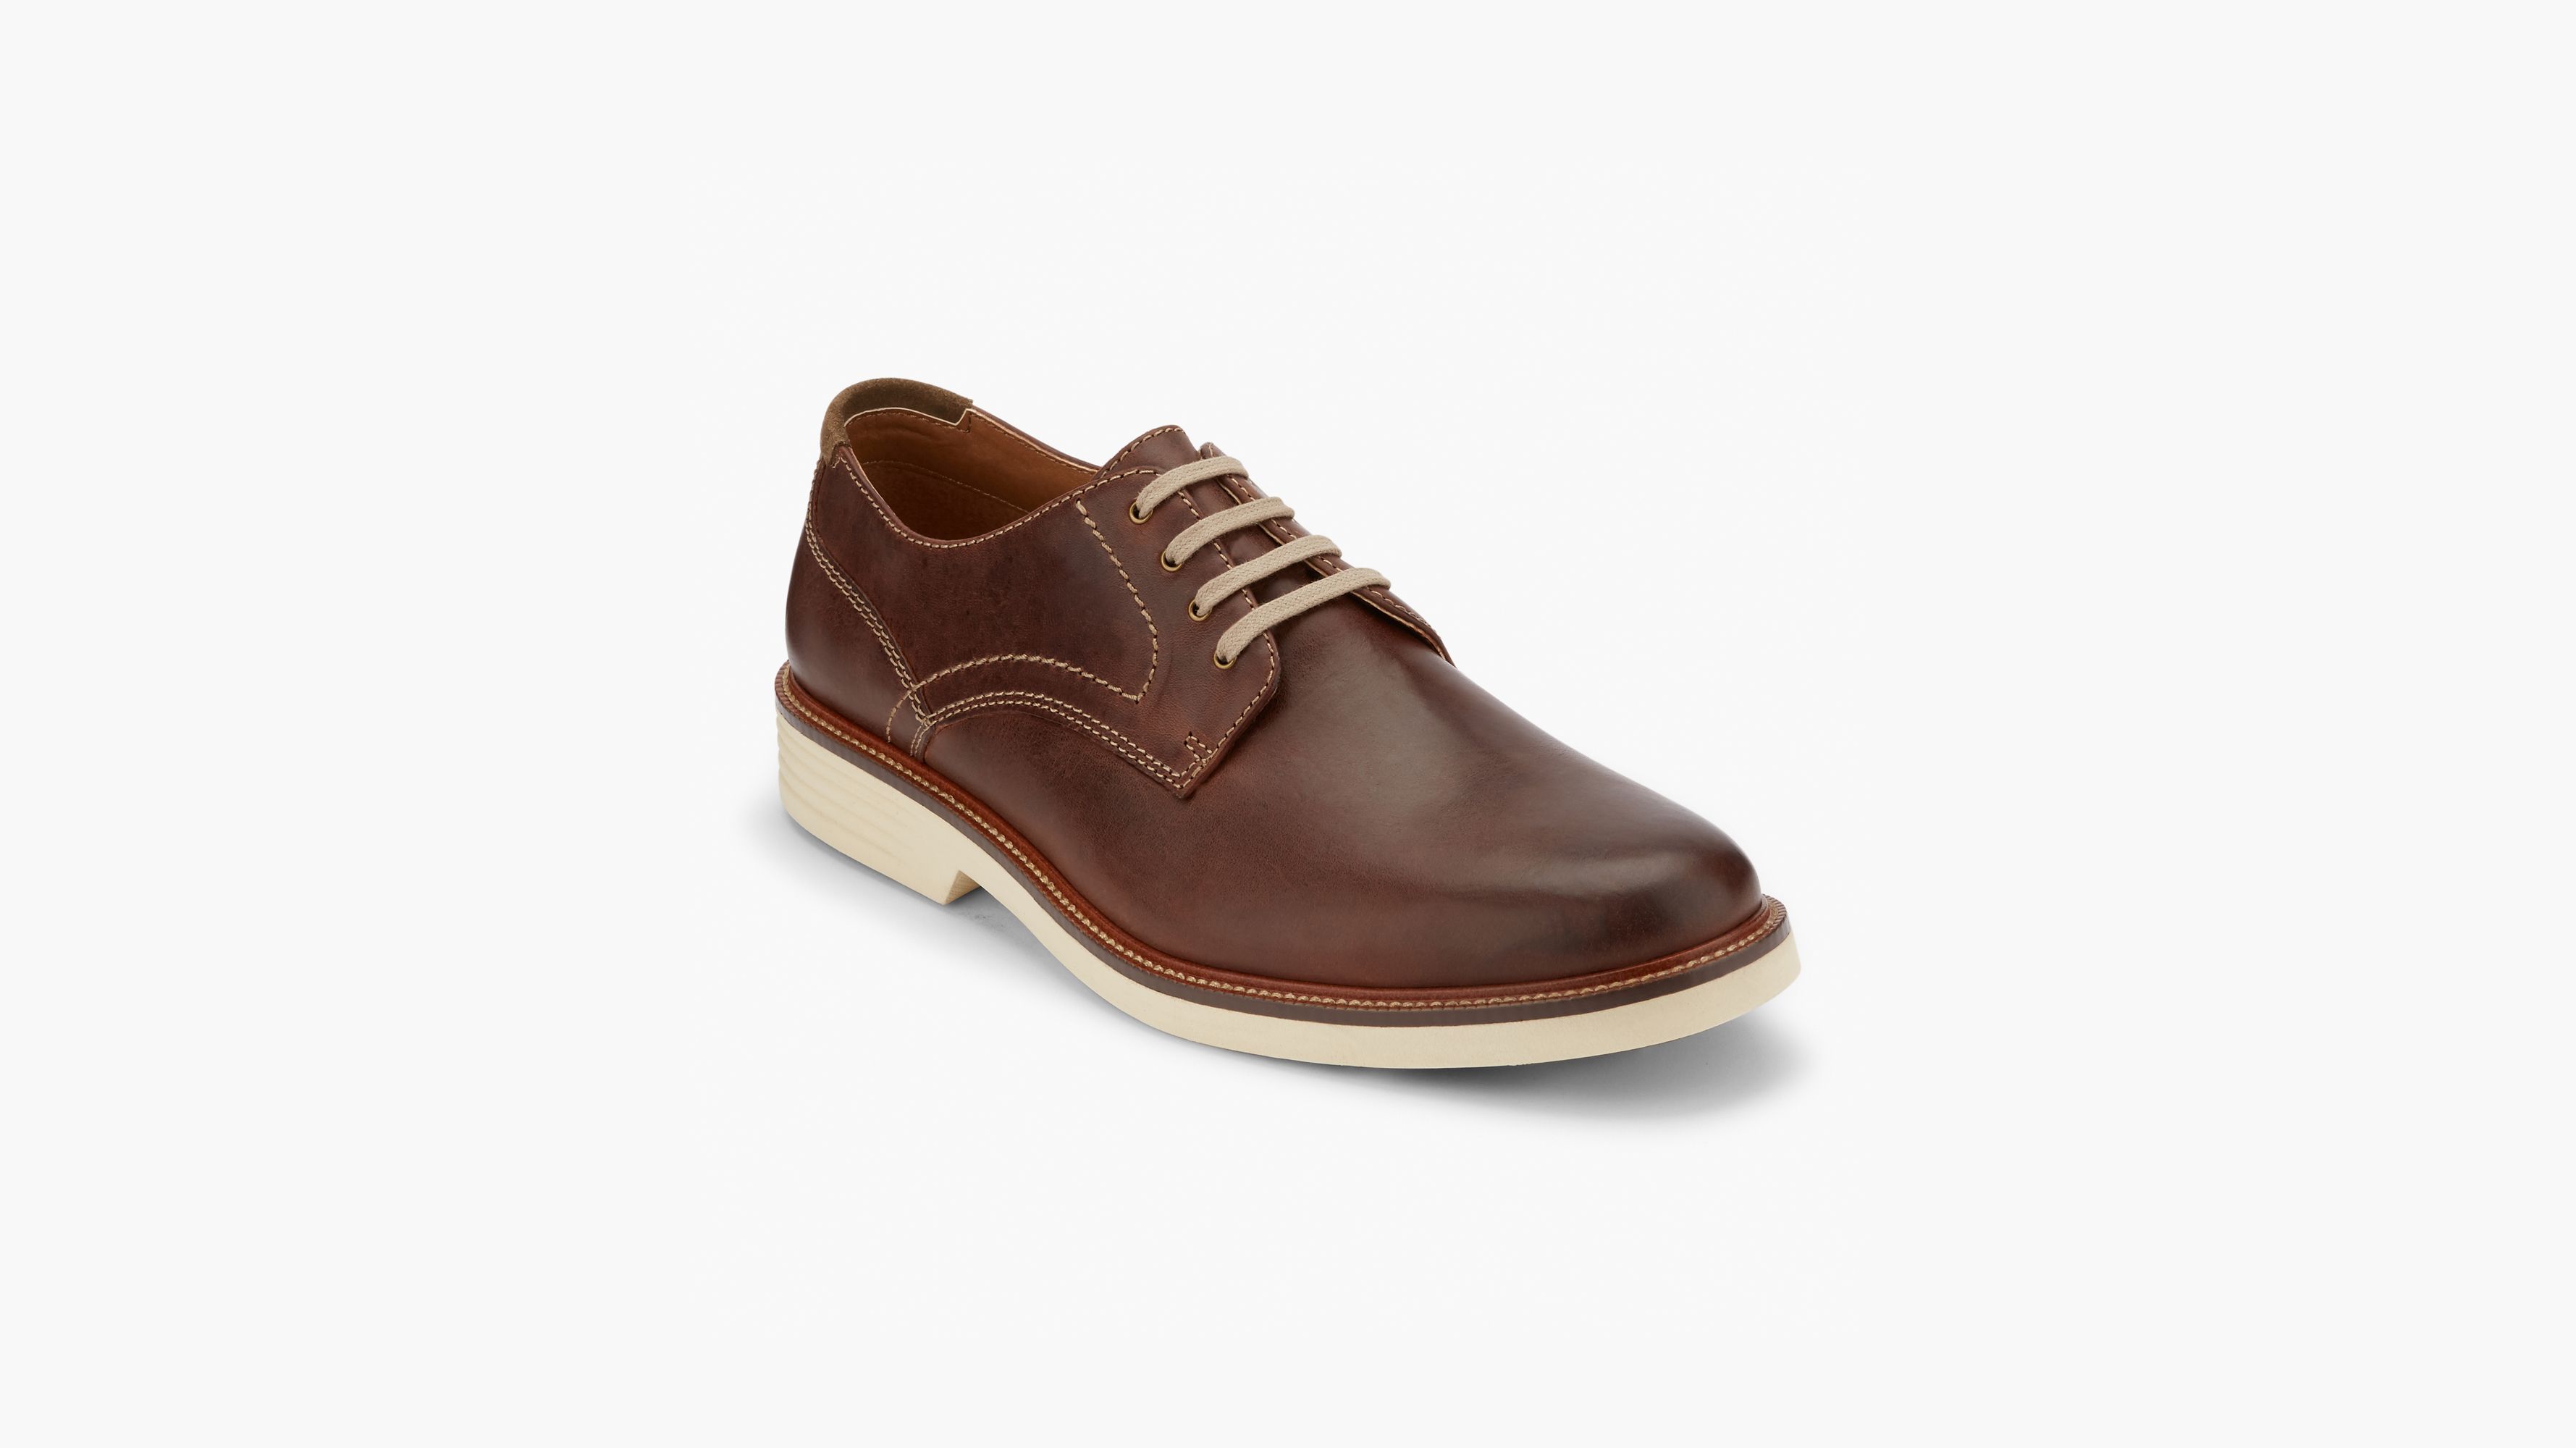 Men's Shoes - Dress Shoes, Loafers, Boat Shoes & More | Dockers® US